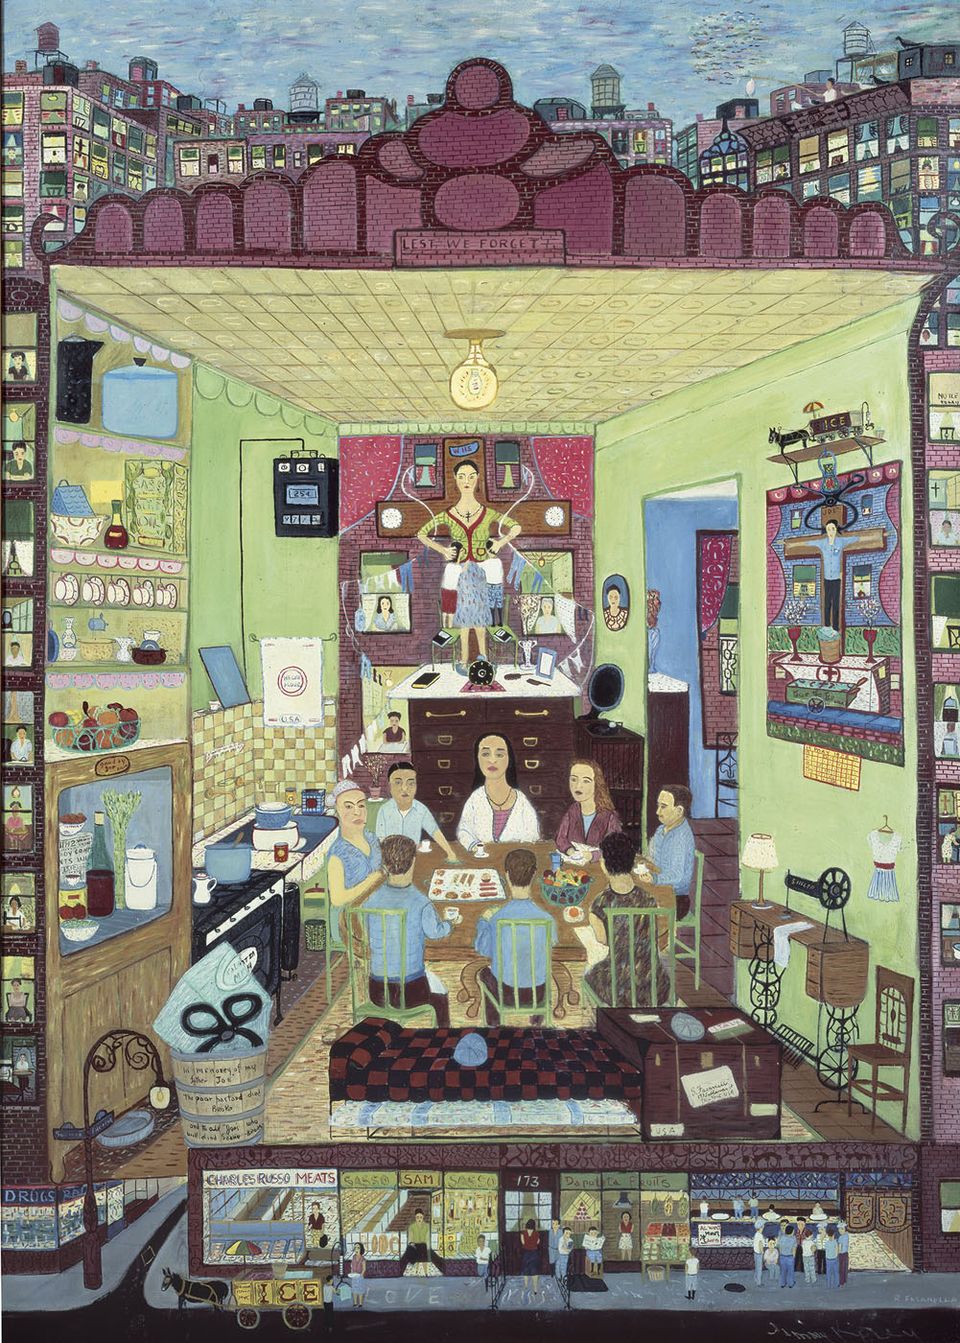 Fasanella's Family Supper, a painting of the interior of a kitchen with a family around a table.